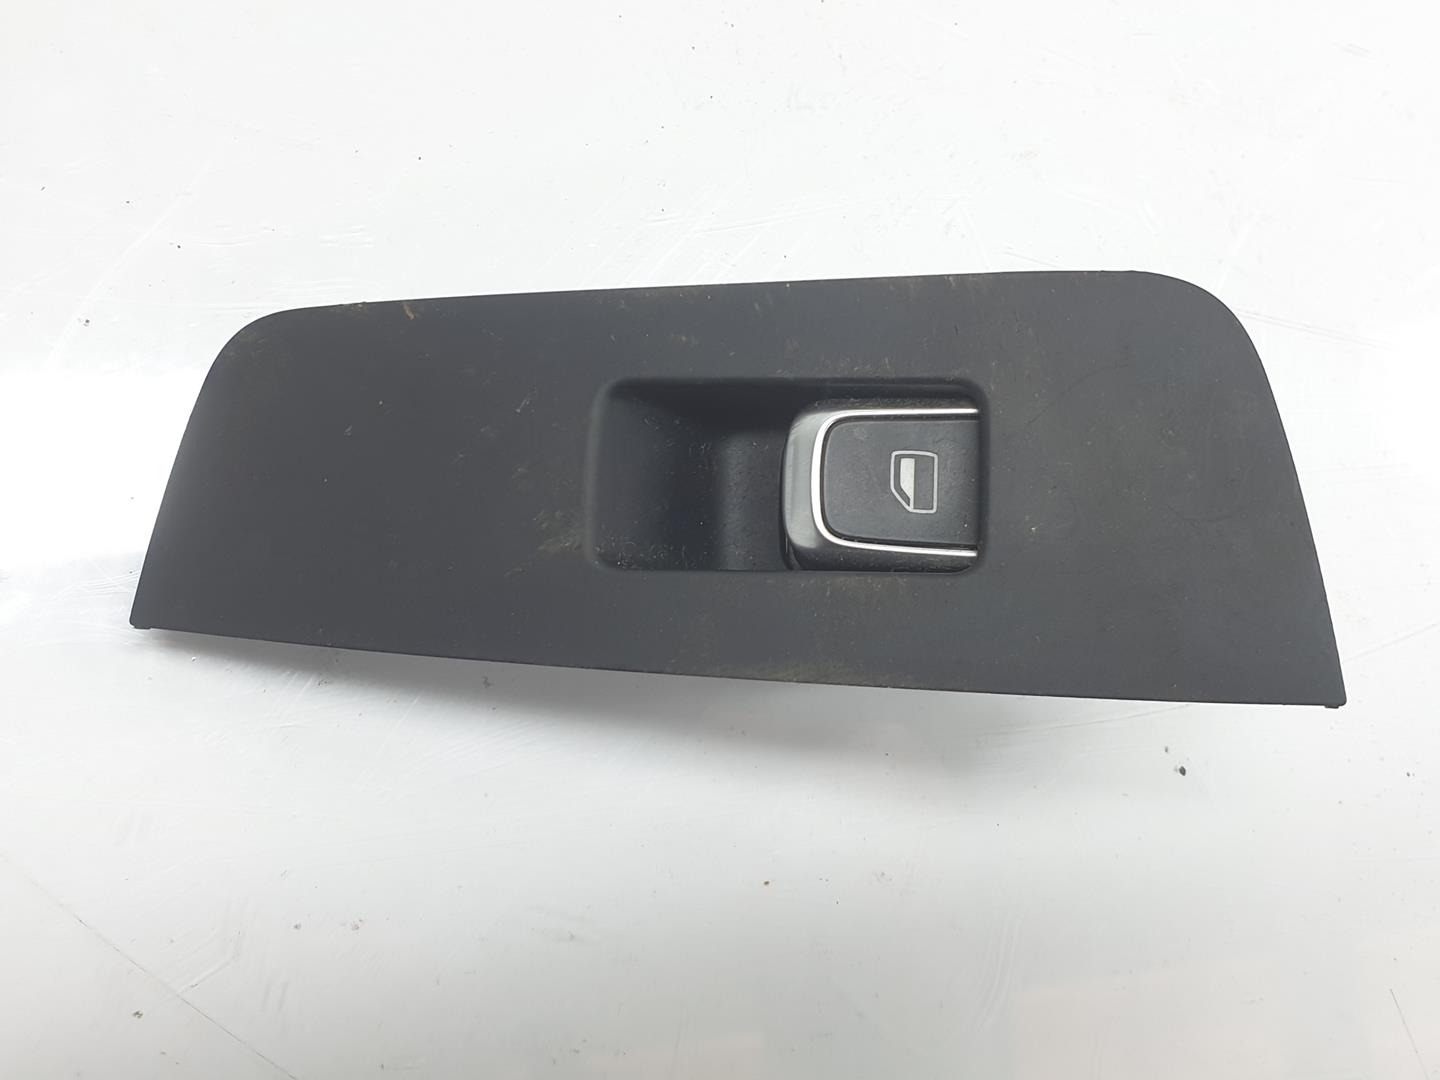 AUDI A7 C7/4G (2010-2020) Rear Right Door Window Control Switch 4H0959855A, 4H0959855A 19820616